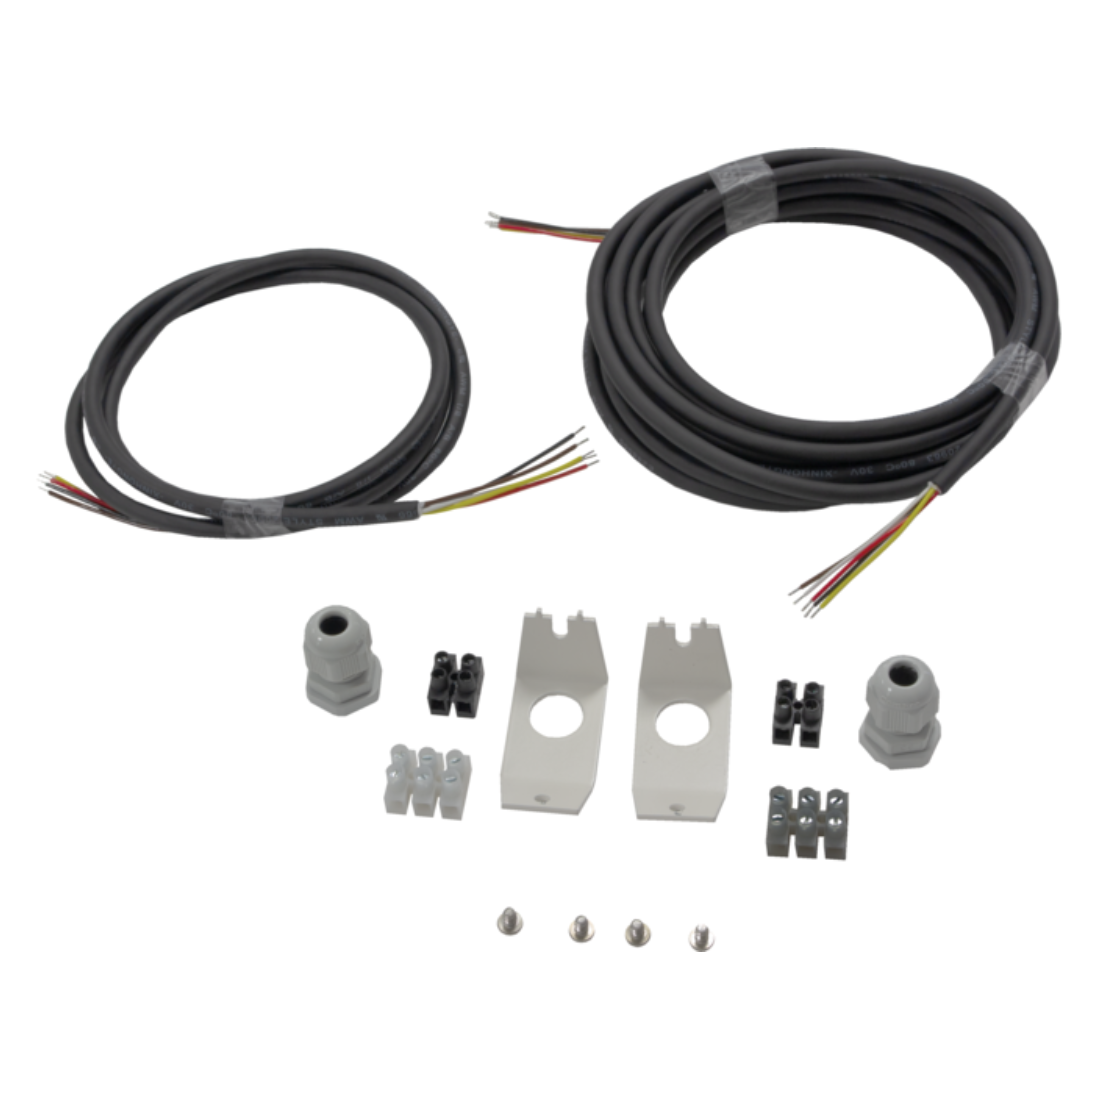 CAME LED Connecting Kit Barrier Boom with Joint